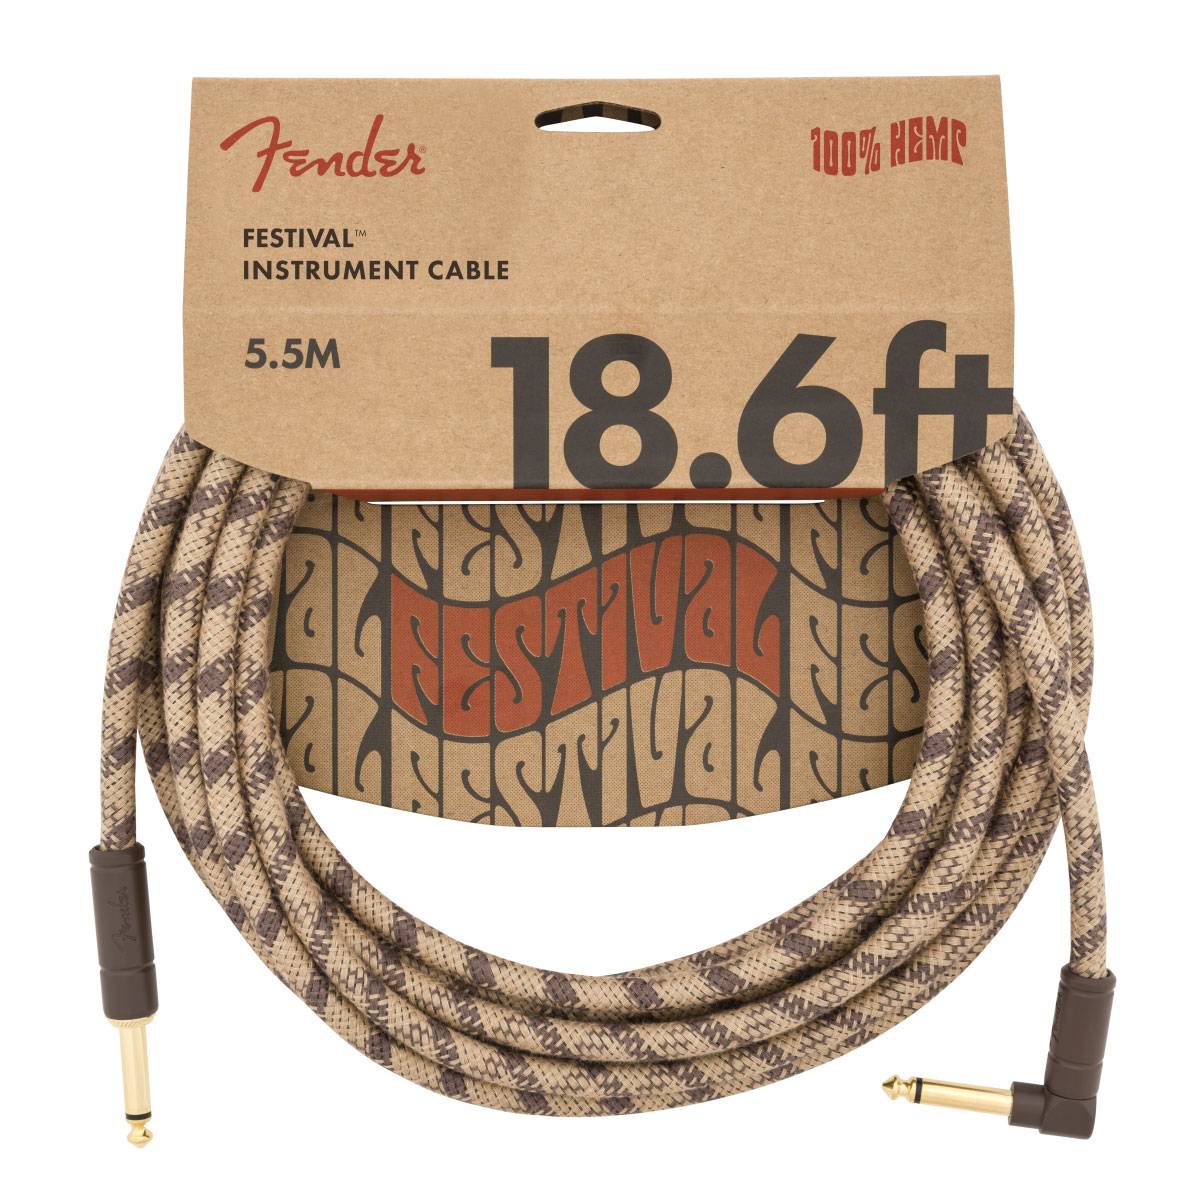 FENDER 18.6' ANGLED FESTIVAL INSTRUMENT CABLE, PURE HEMP, BROWN STRIPE